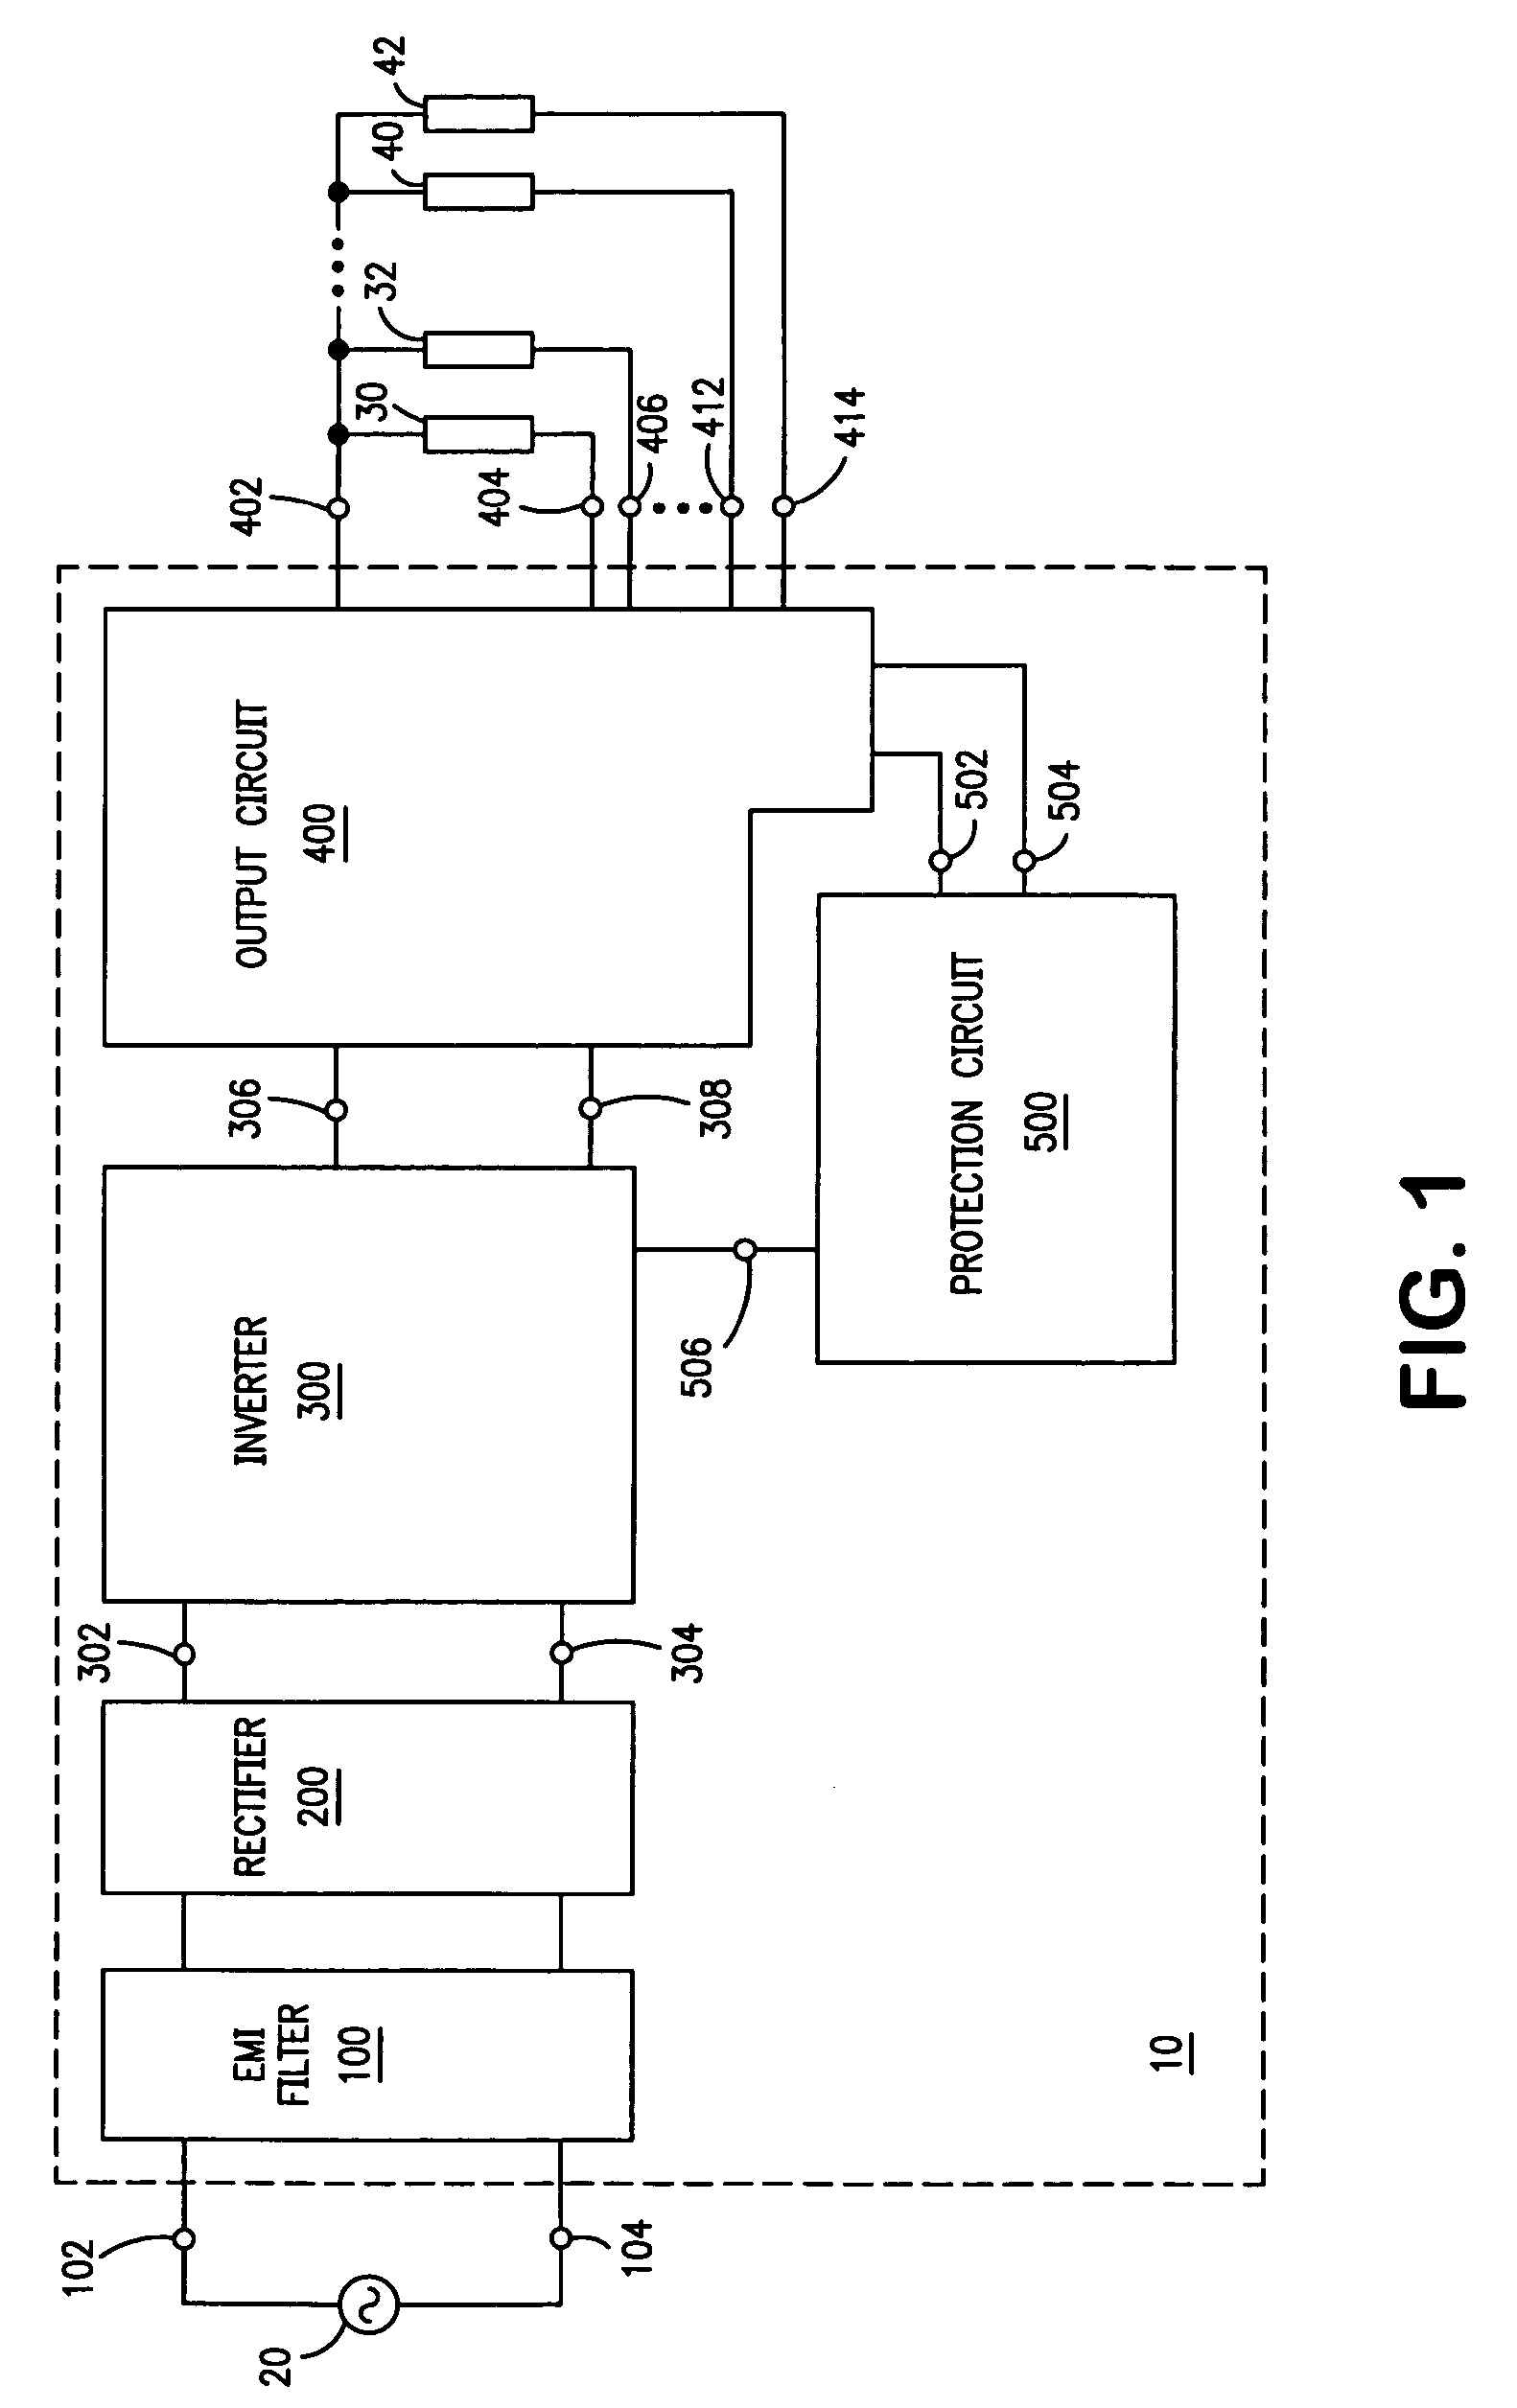 Ballast with end-of-lamp-life protection circuit